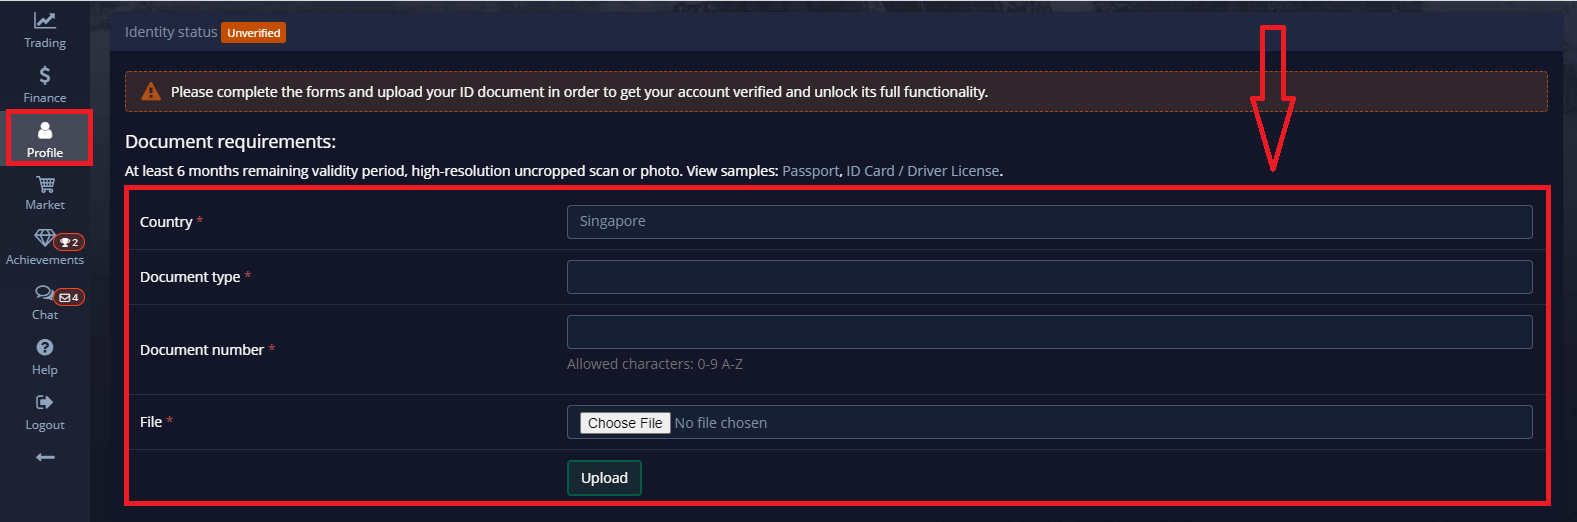 How to Verify Account in Pocket Option